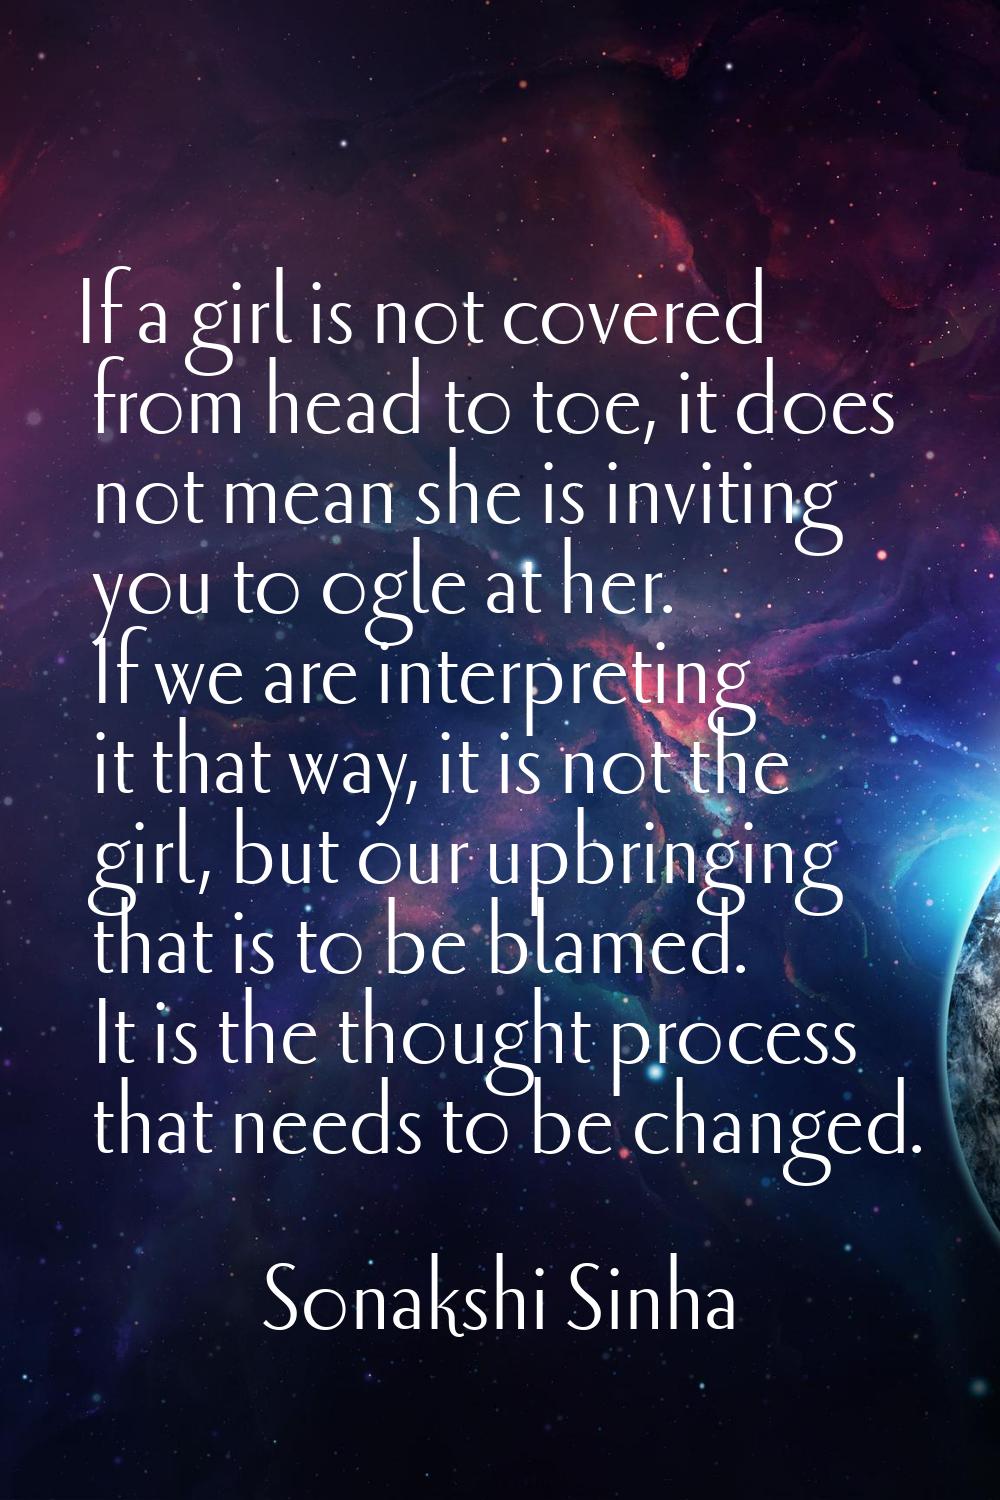 If a girl is not covered from head to toe, it does not mean she is inviting you to ogle at her. If 